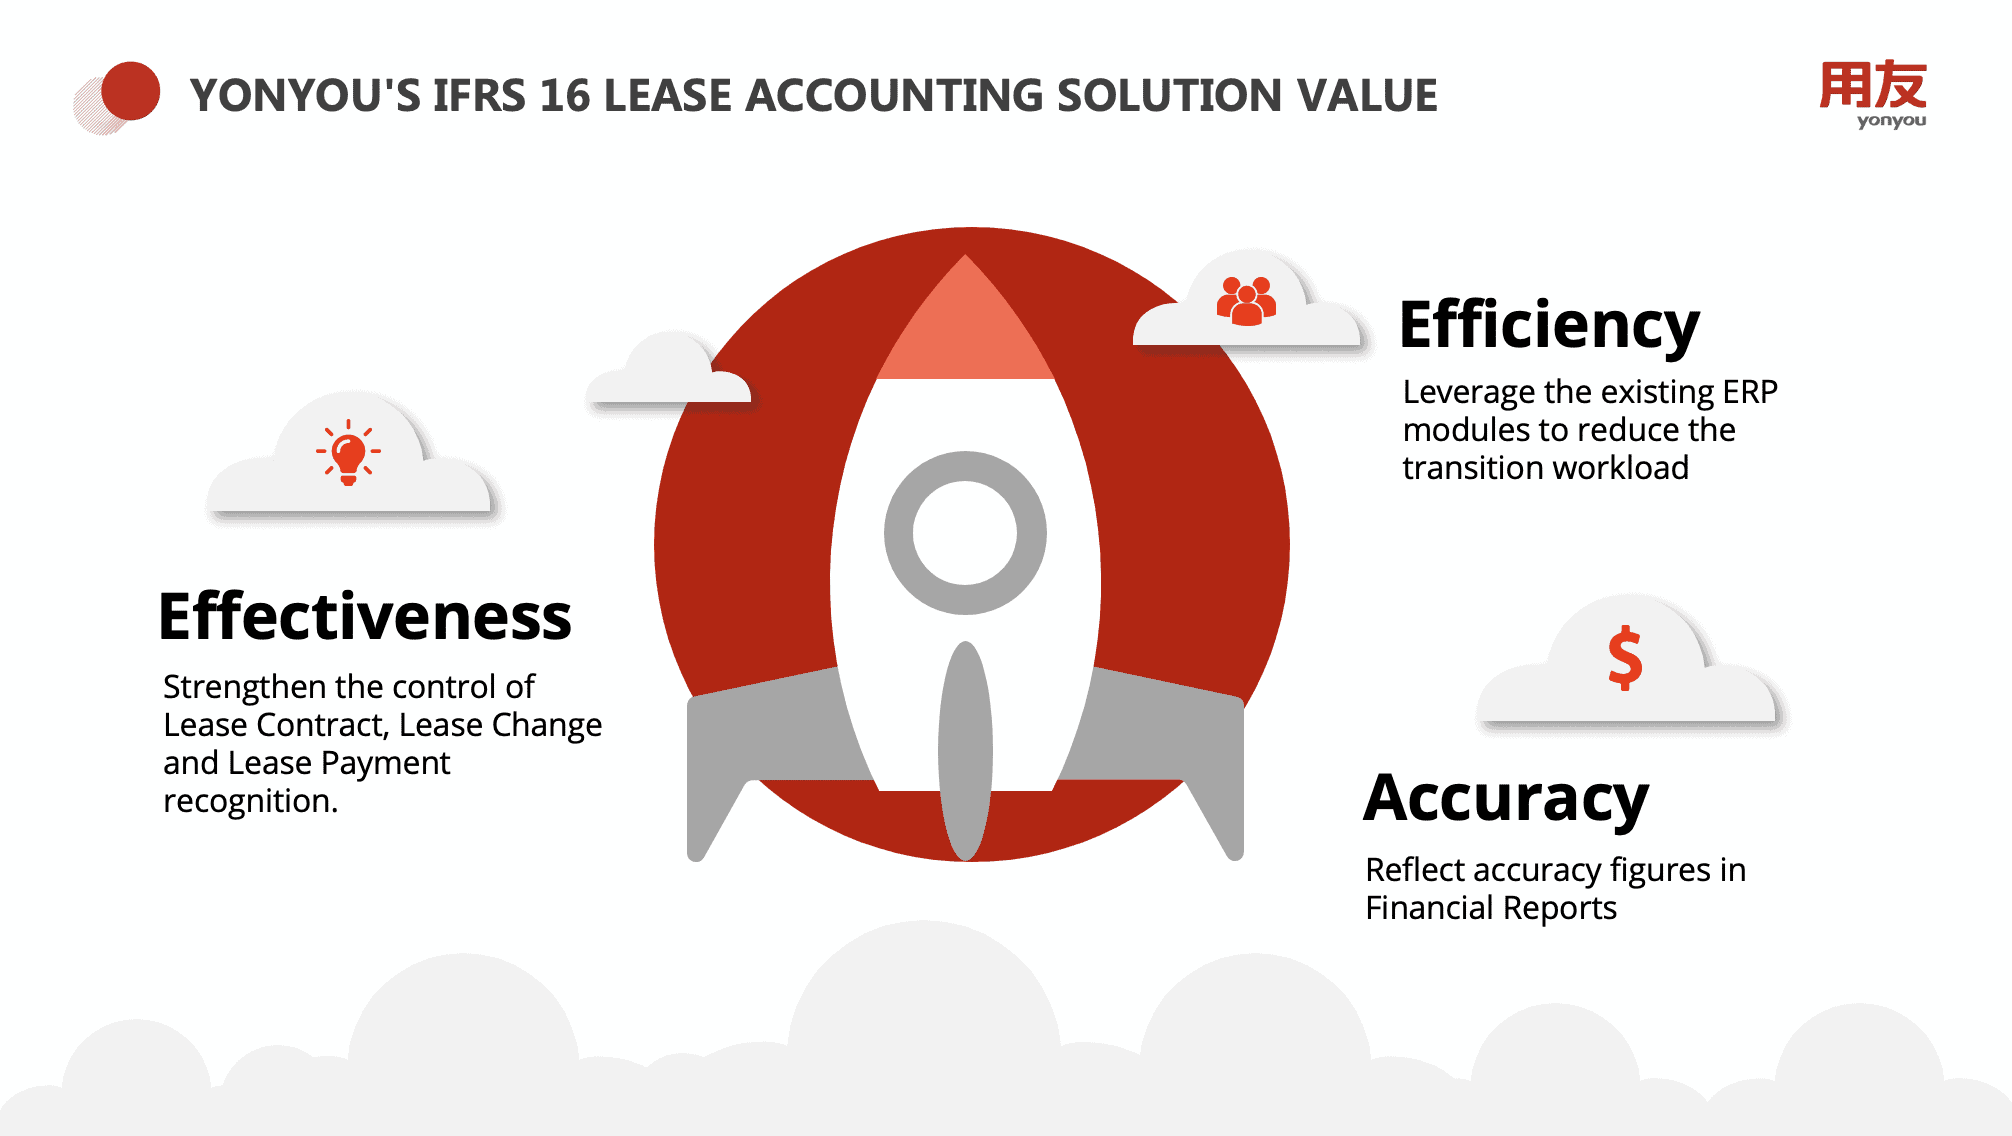 yonyou-IFRS16-lease-accounting-solution-value-efficiency-effectiveness-accuracy